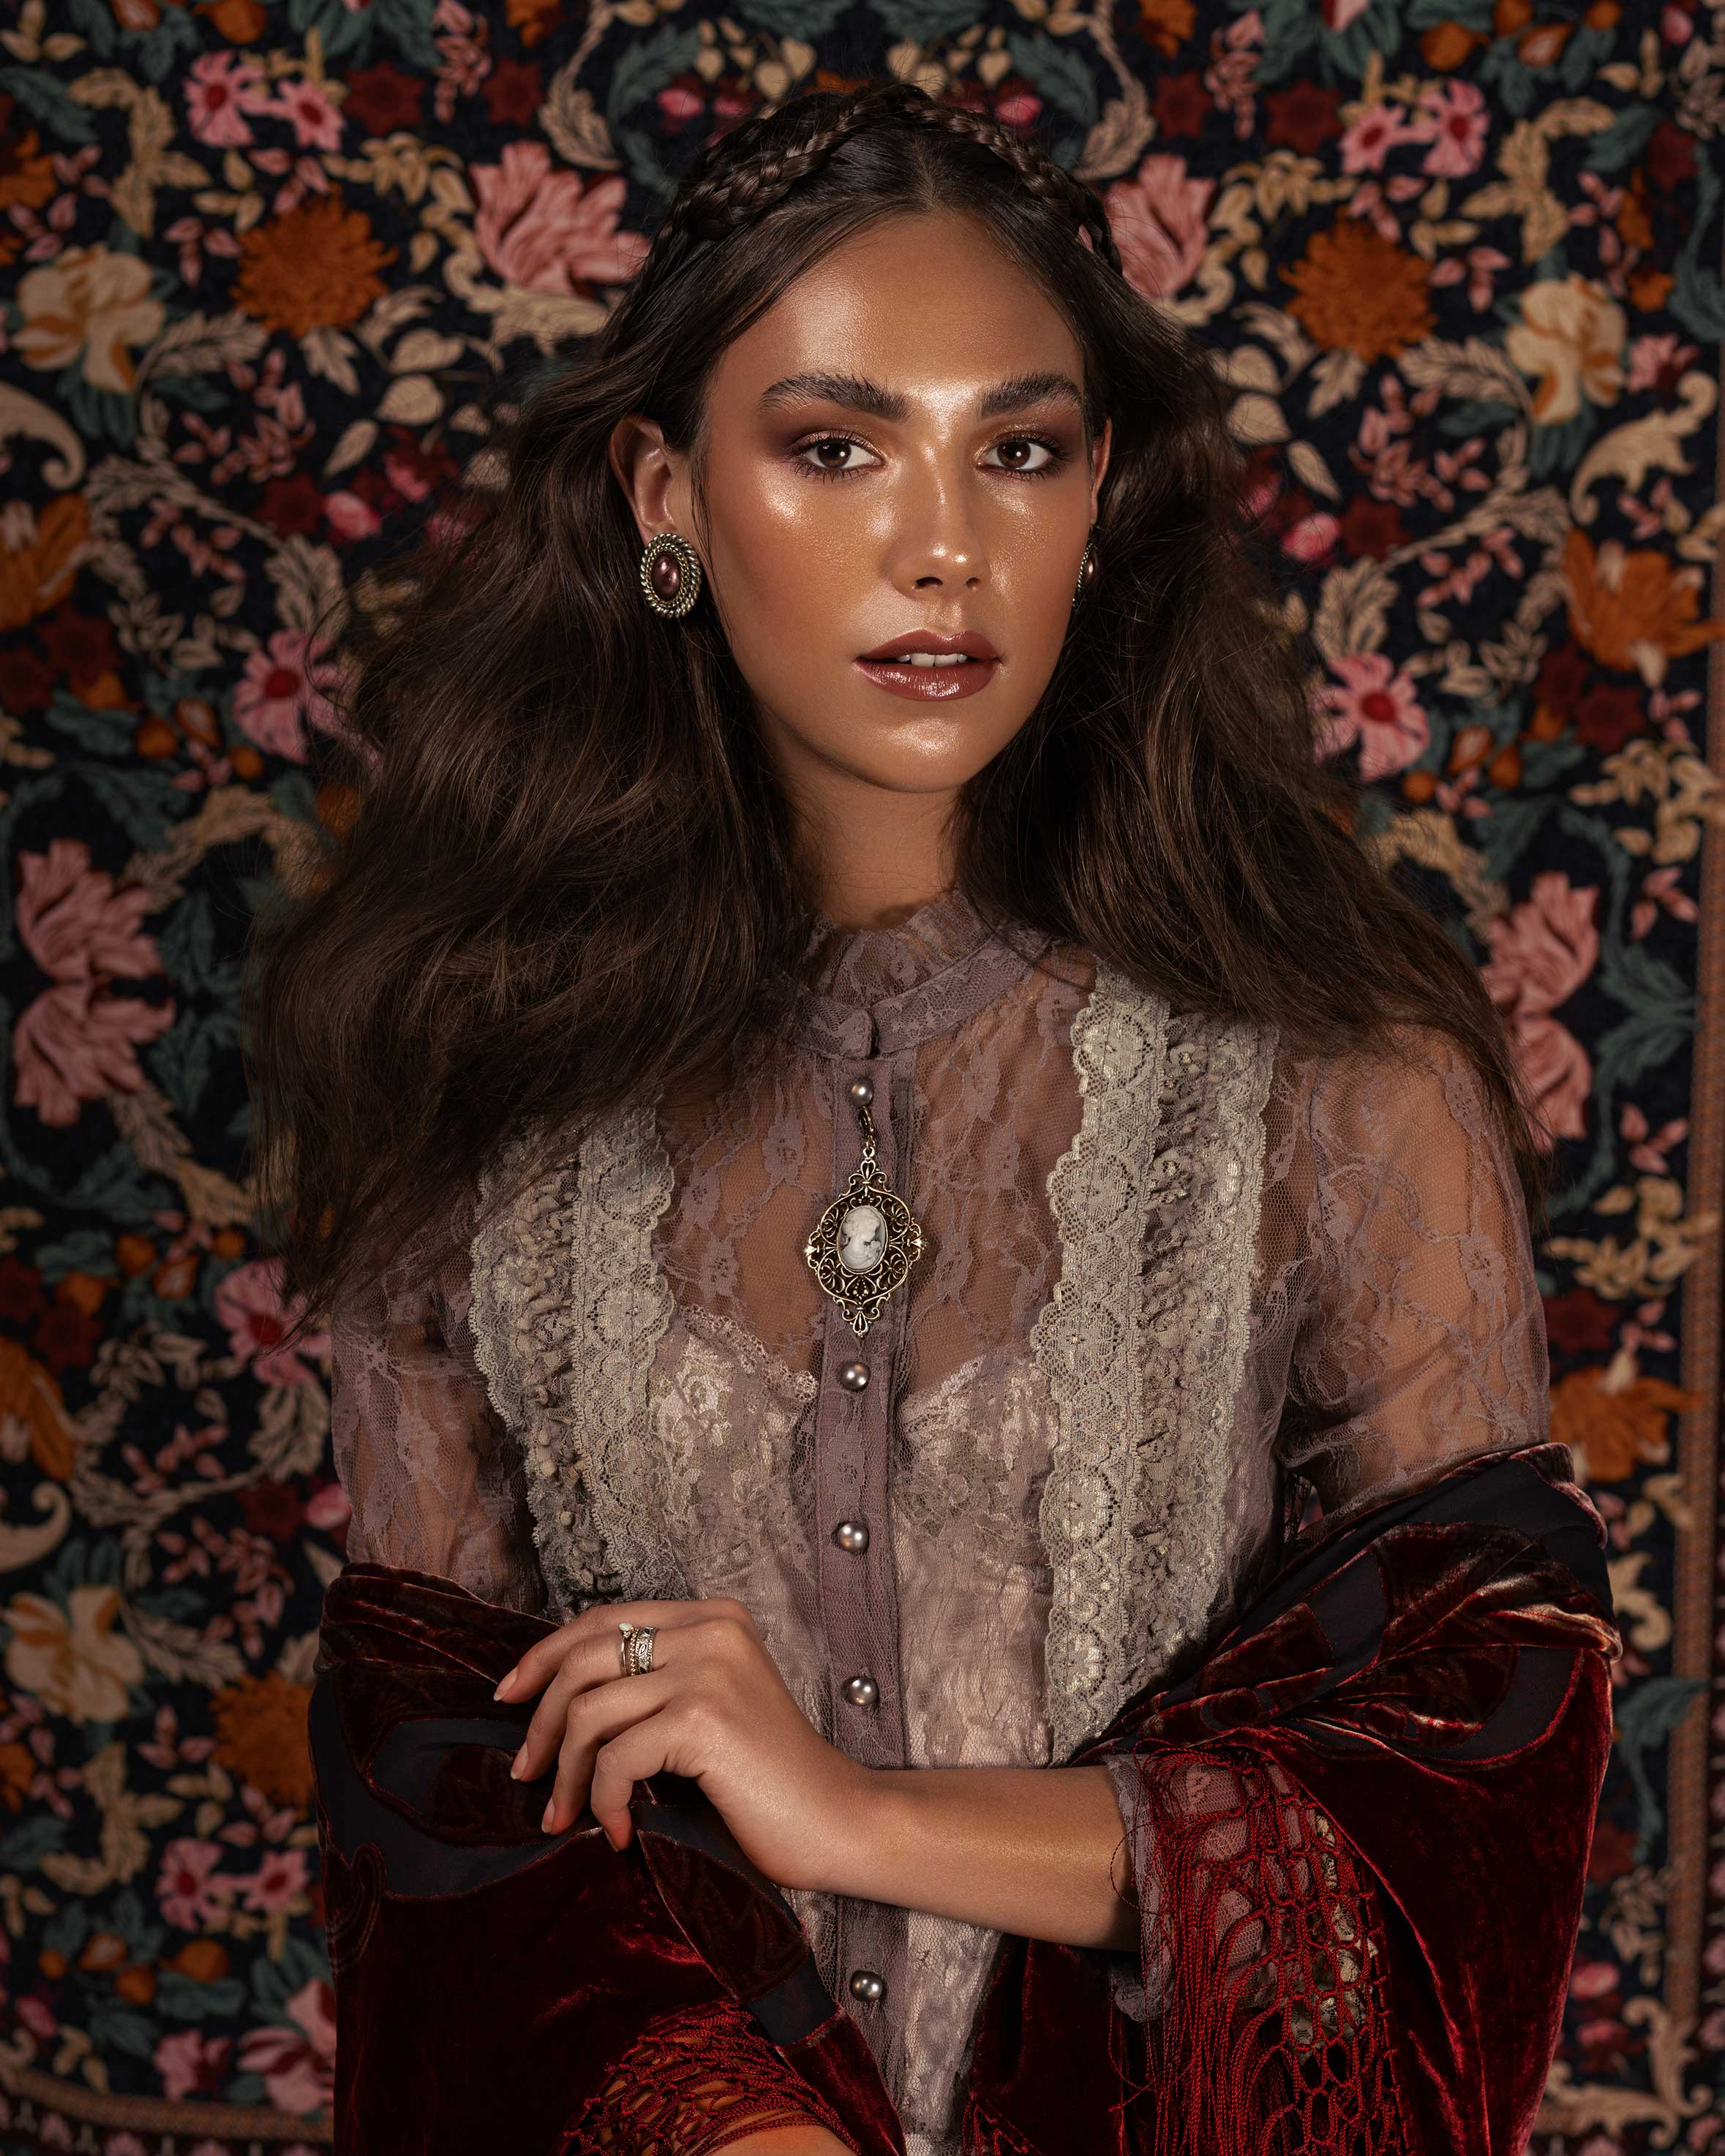  Renaissance styled portrait in vintage clothing 